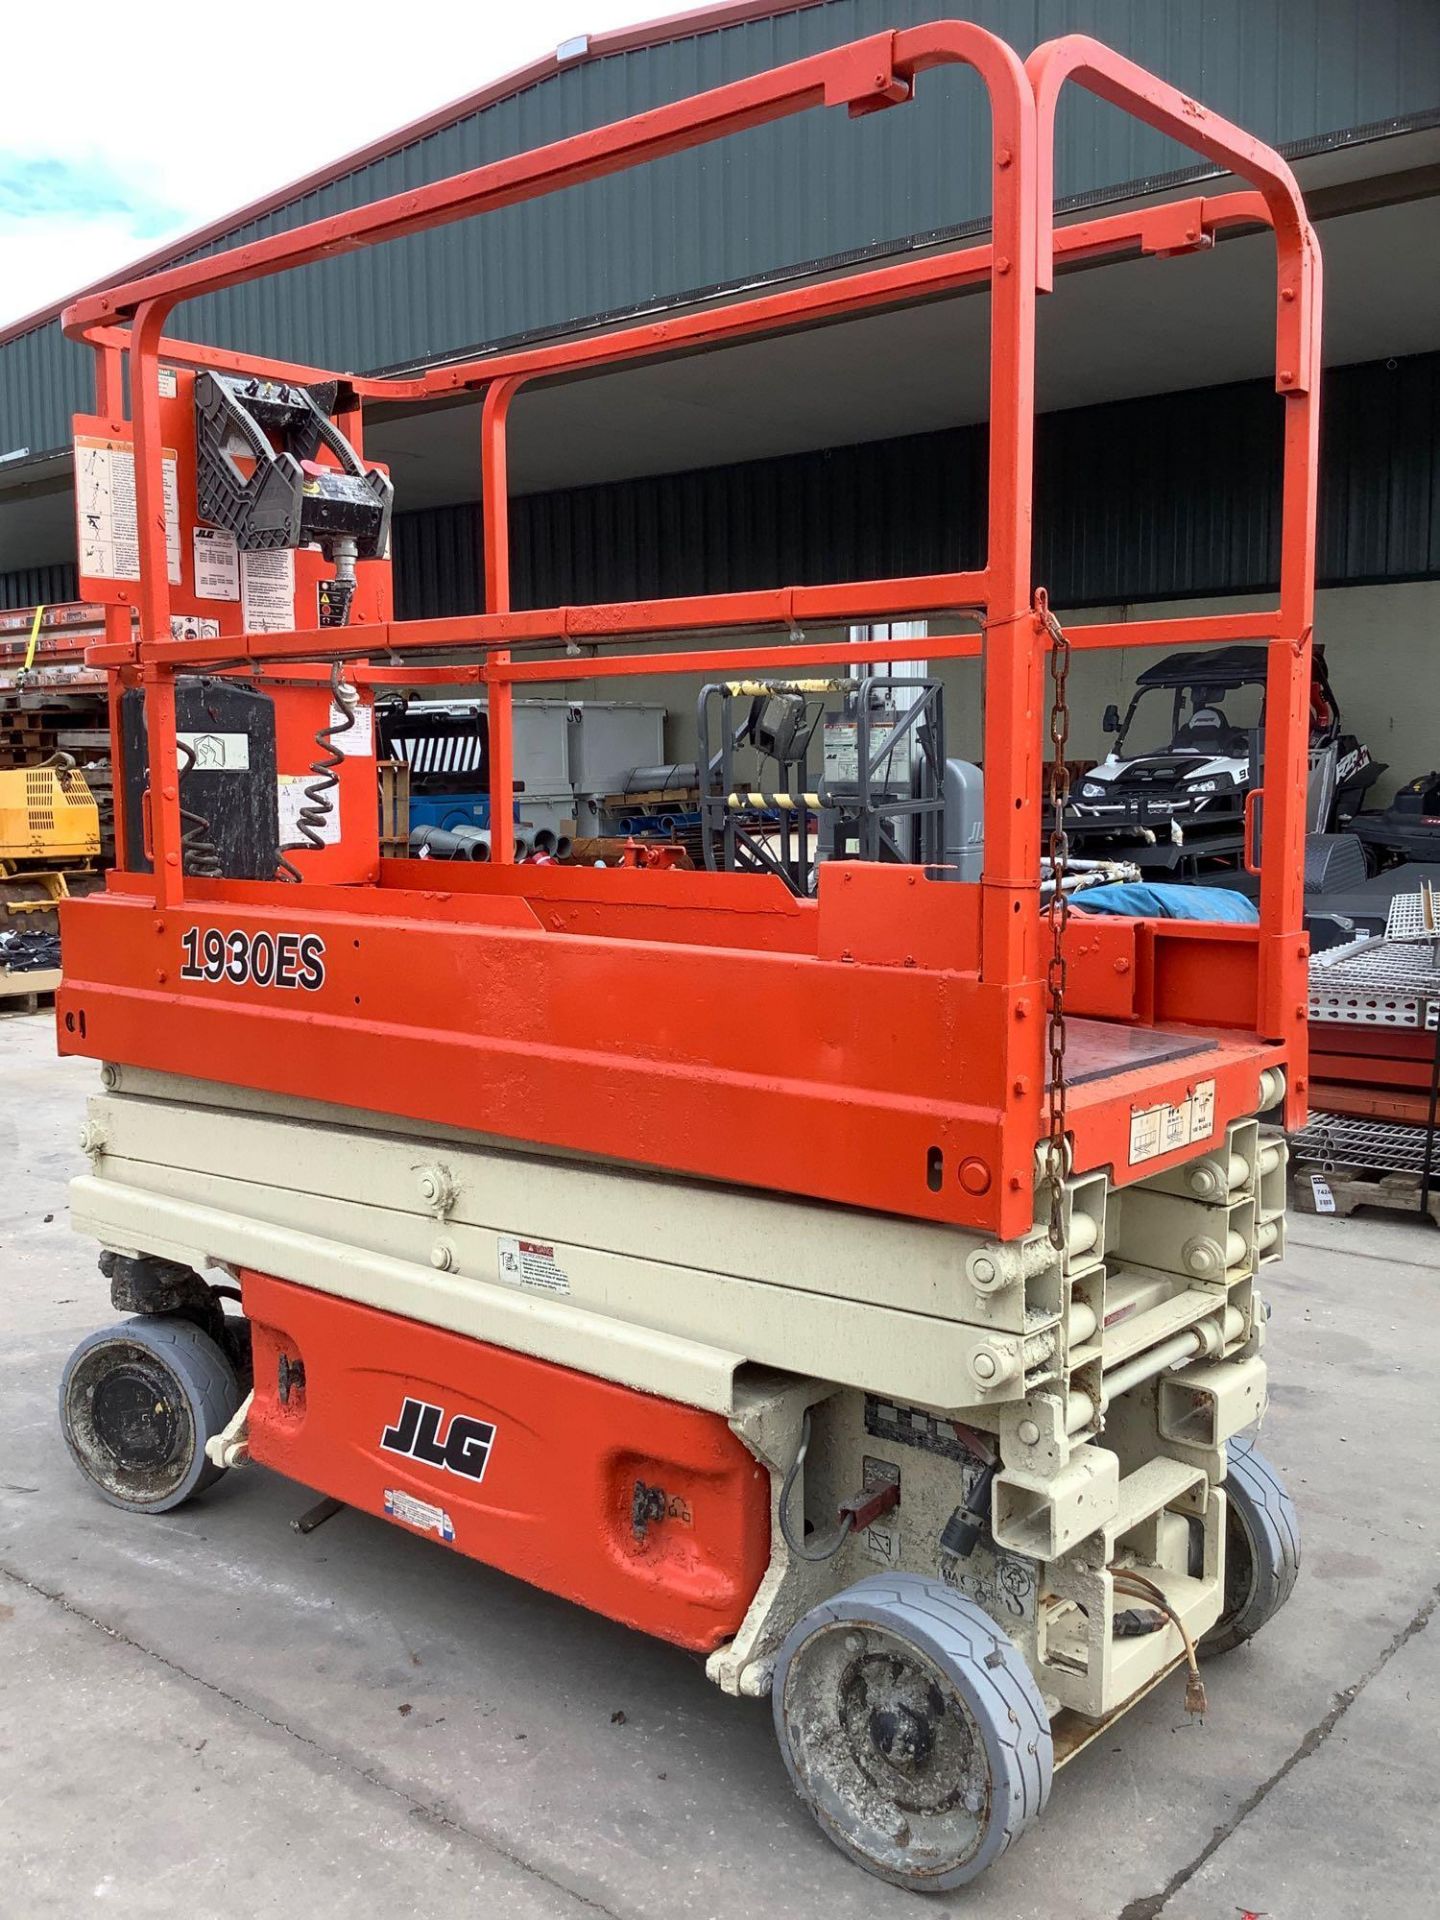 JLG SCISSOR LIFT MODEL 1930ES, ELECTRIC,  APPROX MAX PLATFORM HEIGHT 19FT,  BUILT IN BATTERY CHARGER - Image 7 of 11